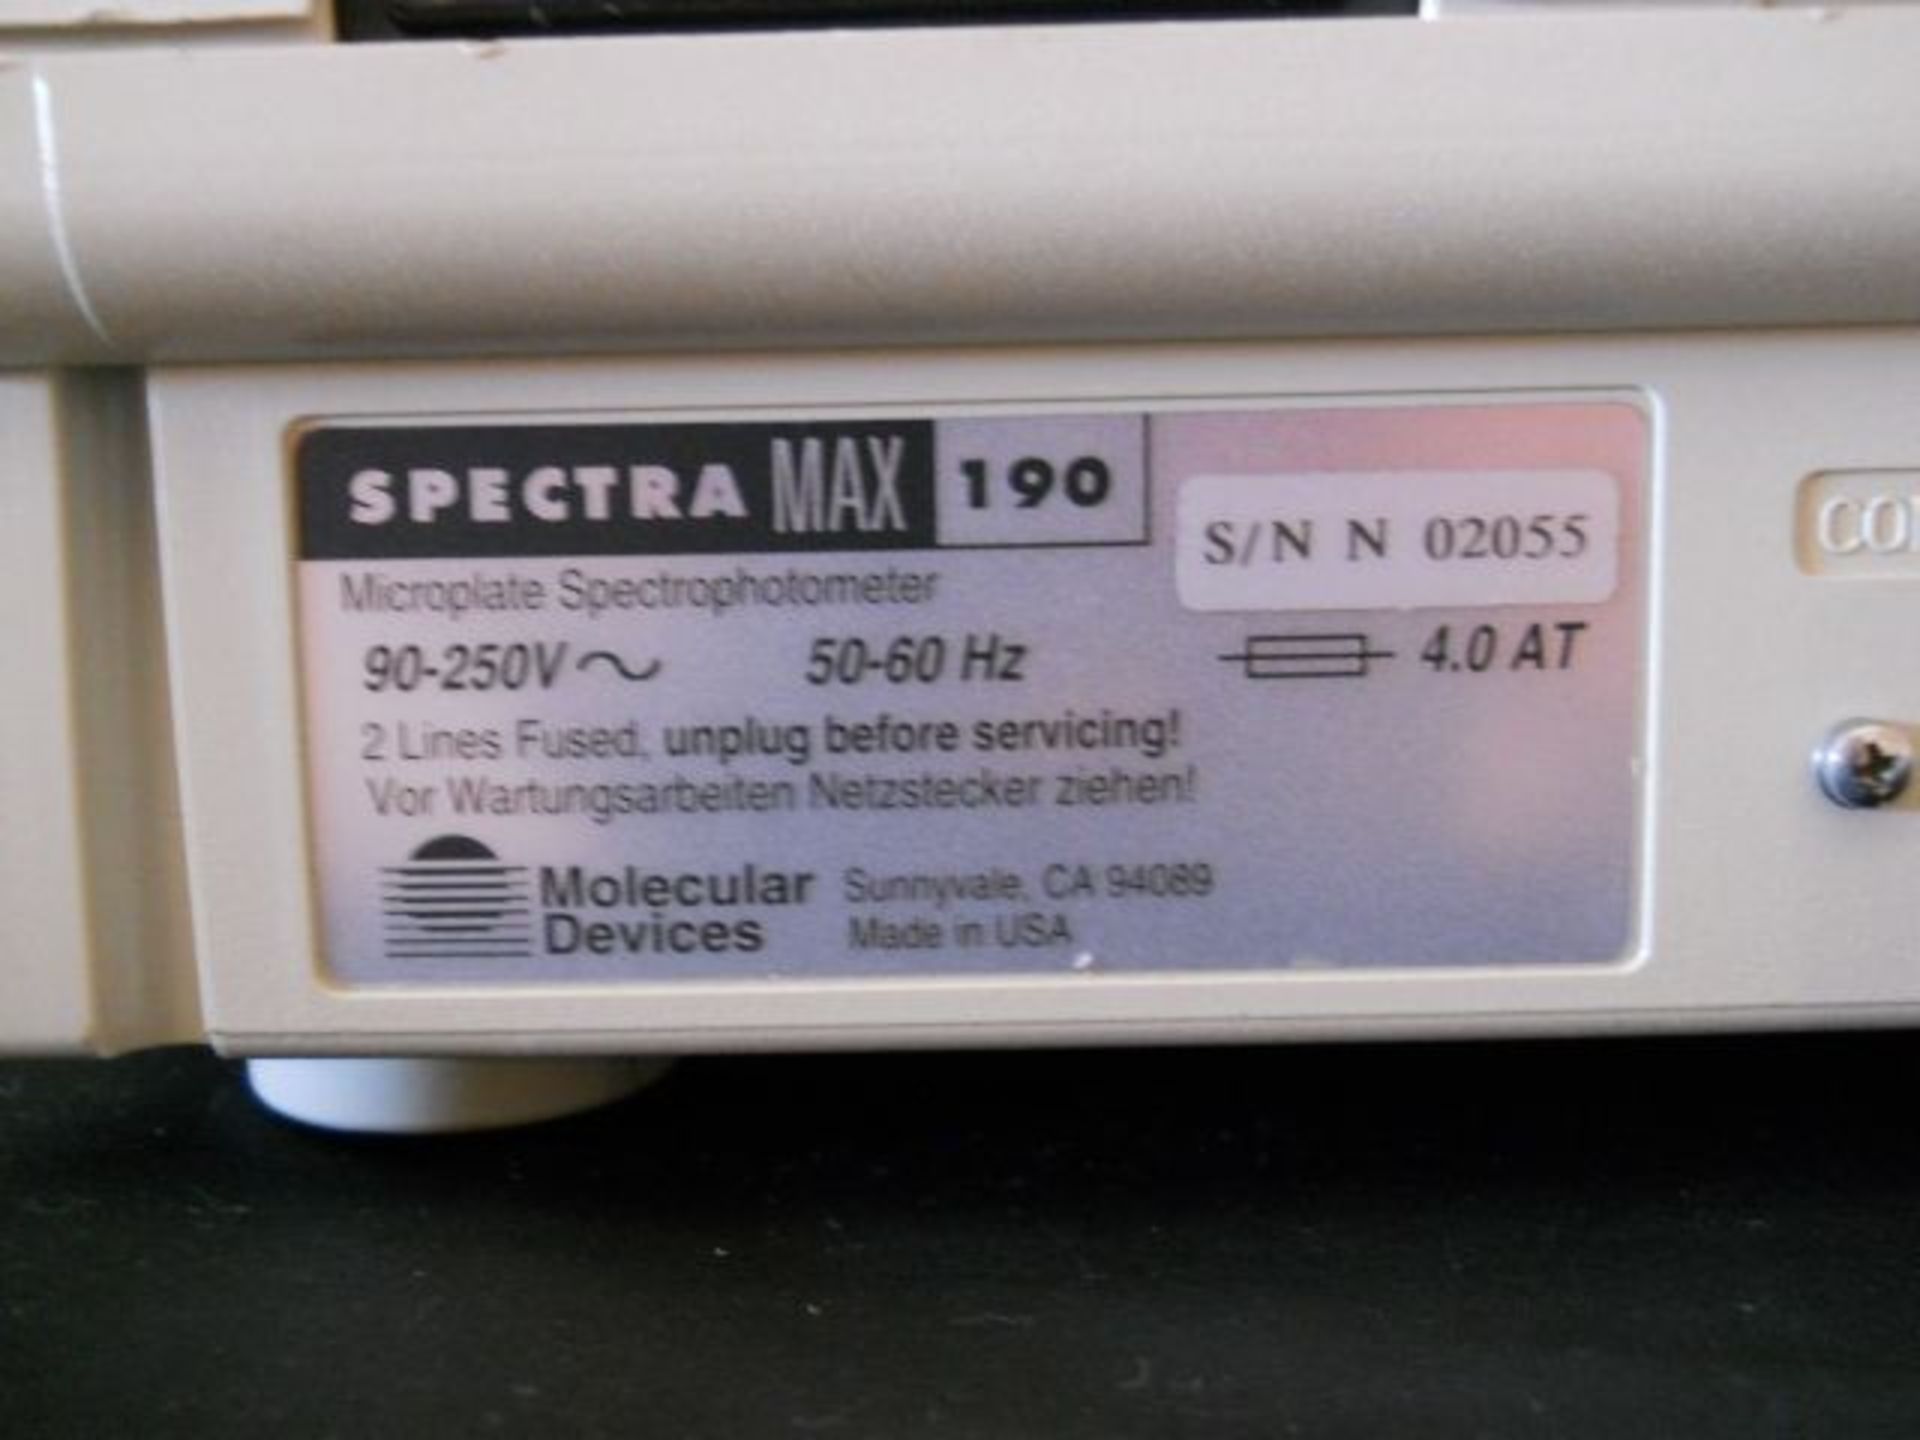 Molecular Devices SpectraMax 190 Microplate Reader Spectrophotometer Spectra Max, Qty 1, - Image 7 of 8